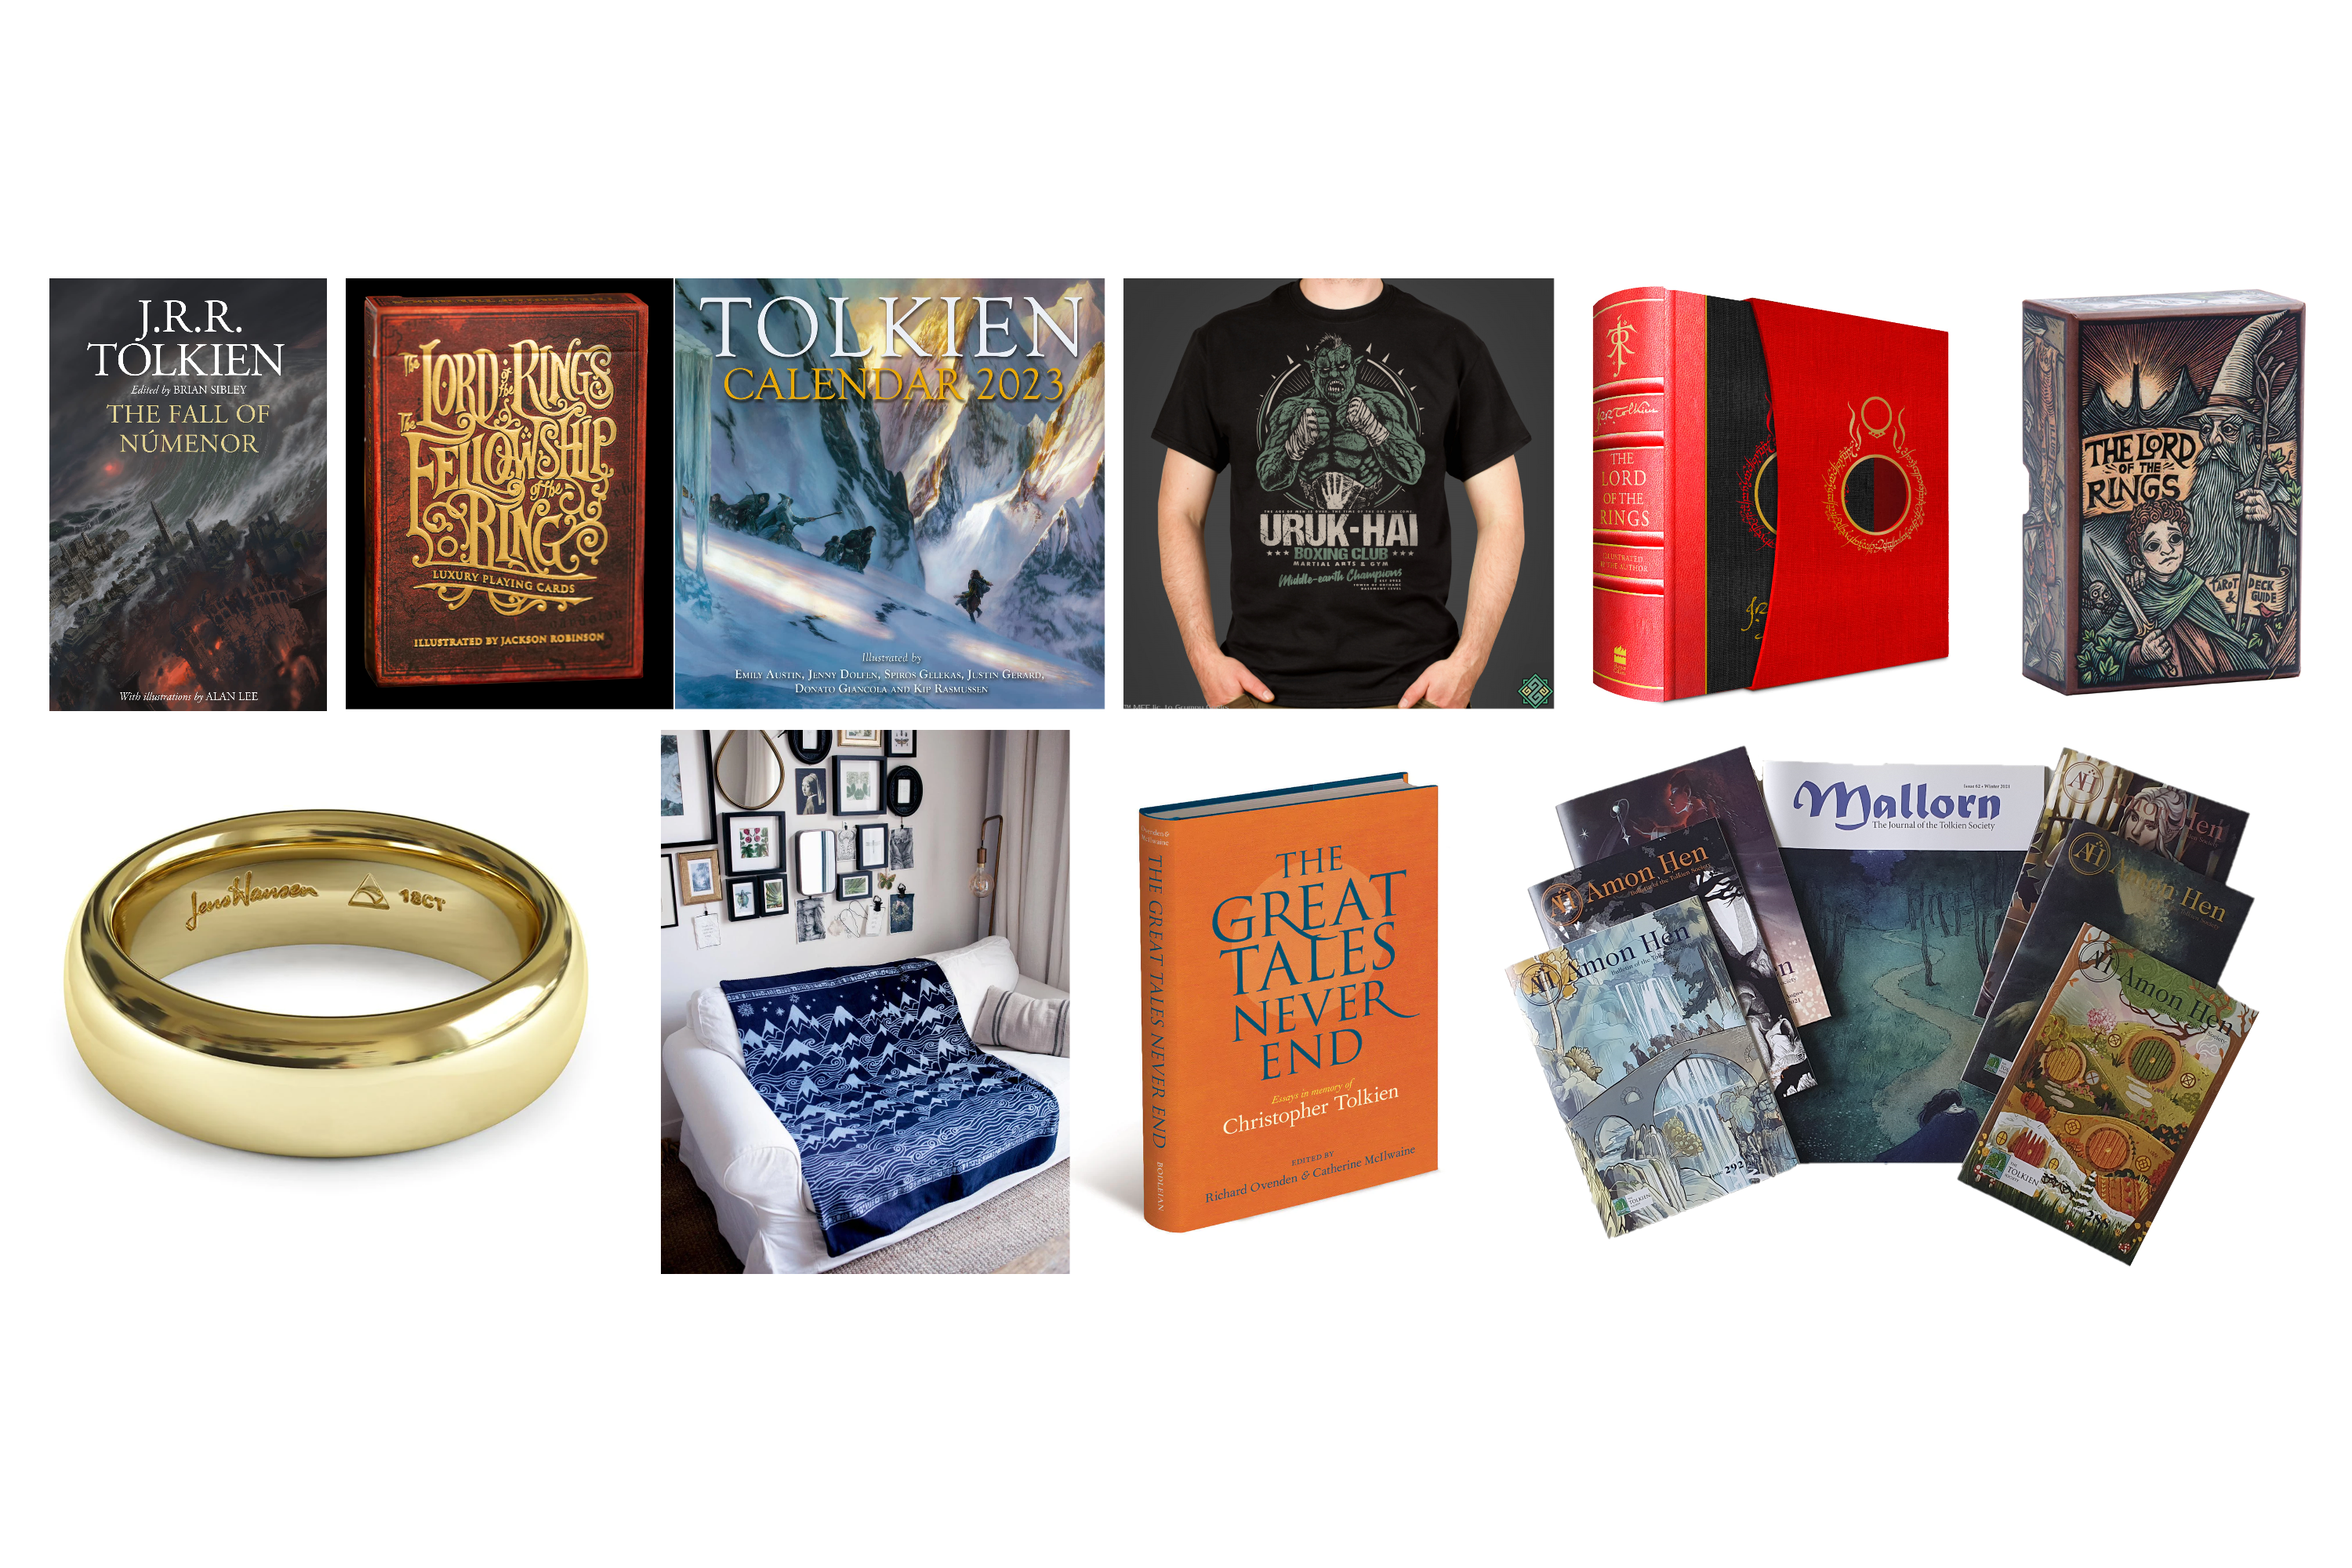 2022 Tolkien Christmas gift guide – The Tolkien Society